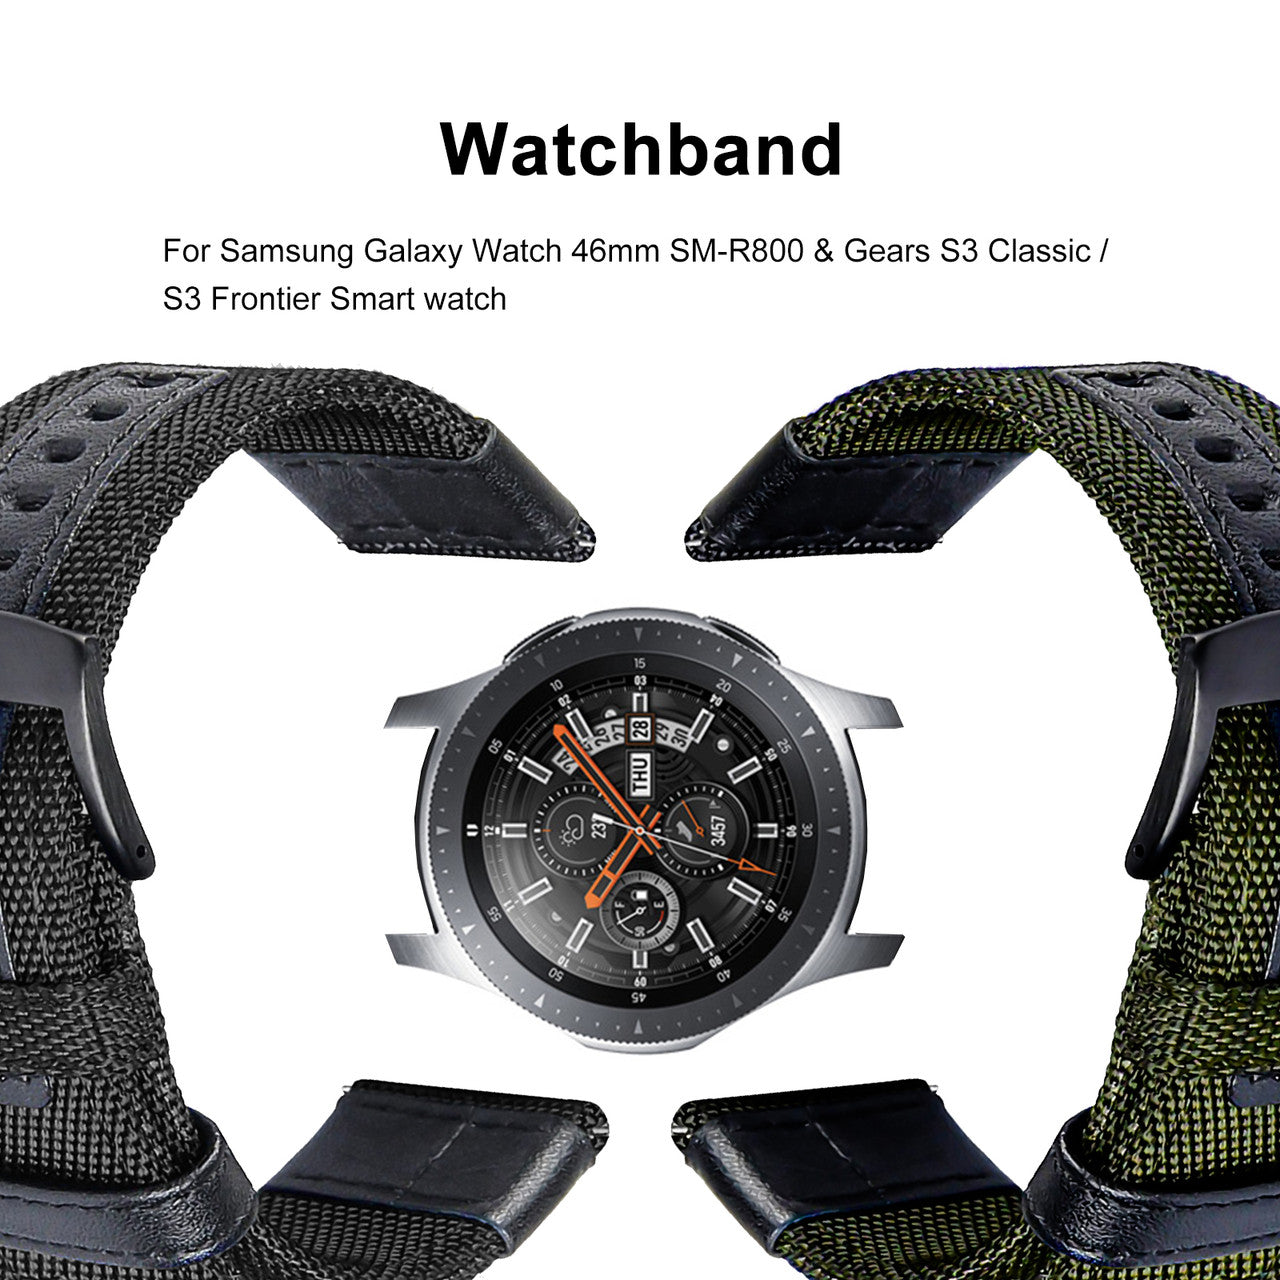 Watchband fits for Galaxy Watch 46mm Bands & Gear S3 Frontier Bands, 22mm Quick Release Nylon Sports Strap Wrist Band fits for Samsung Galaxy Watch 46mm, Gear S3 Frontier/Classic Smartwatch, Black, 2pcs